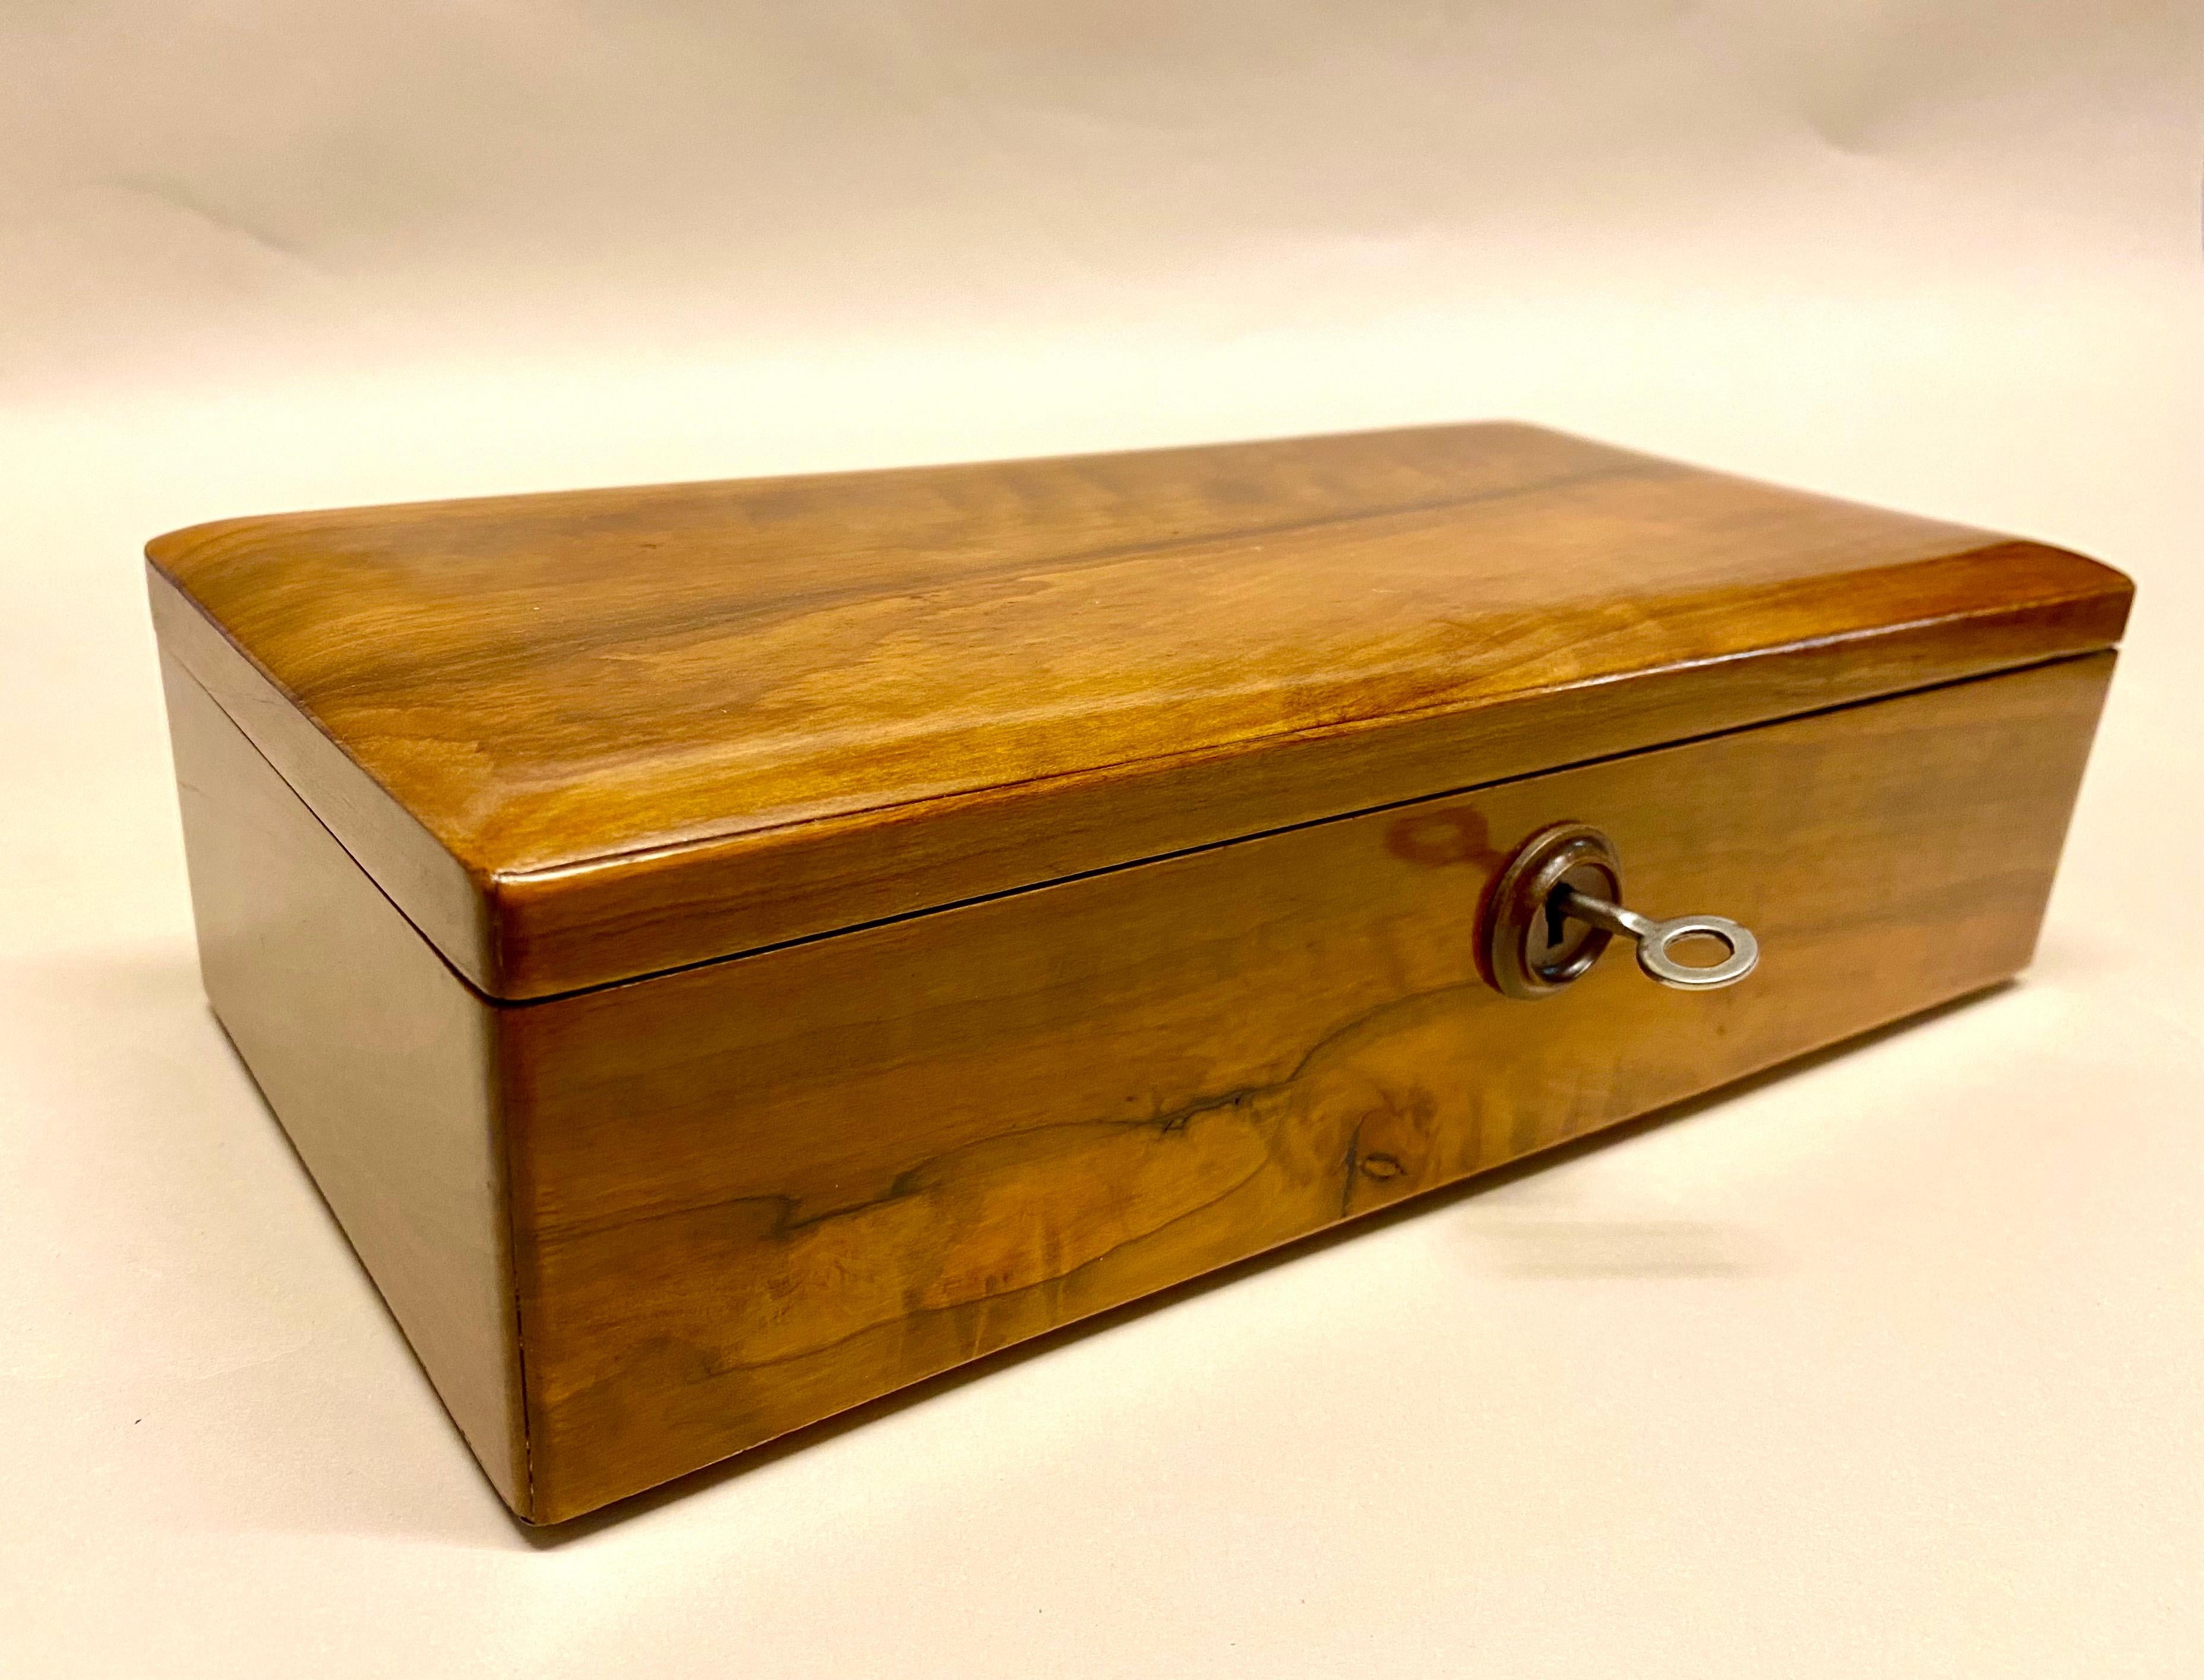 Delicate Art Deco nutwood box from the period around 1920 in Austria. Made of solid nutwood, this beautiful wooden box stands out with clear lines. The hinged lid can be locked with the original lock. A lovely carved wooden This decorative box comes